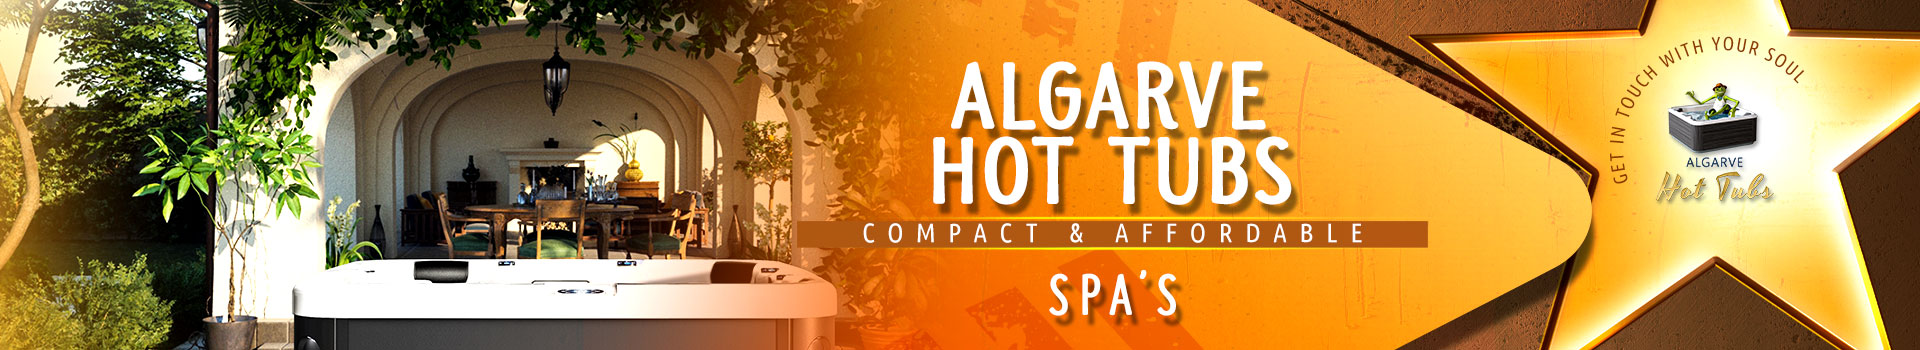 Algarve Hot Tubs - Spa's Great Selection